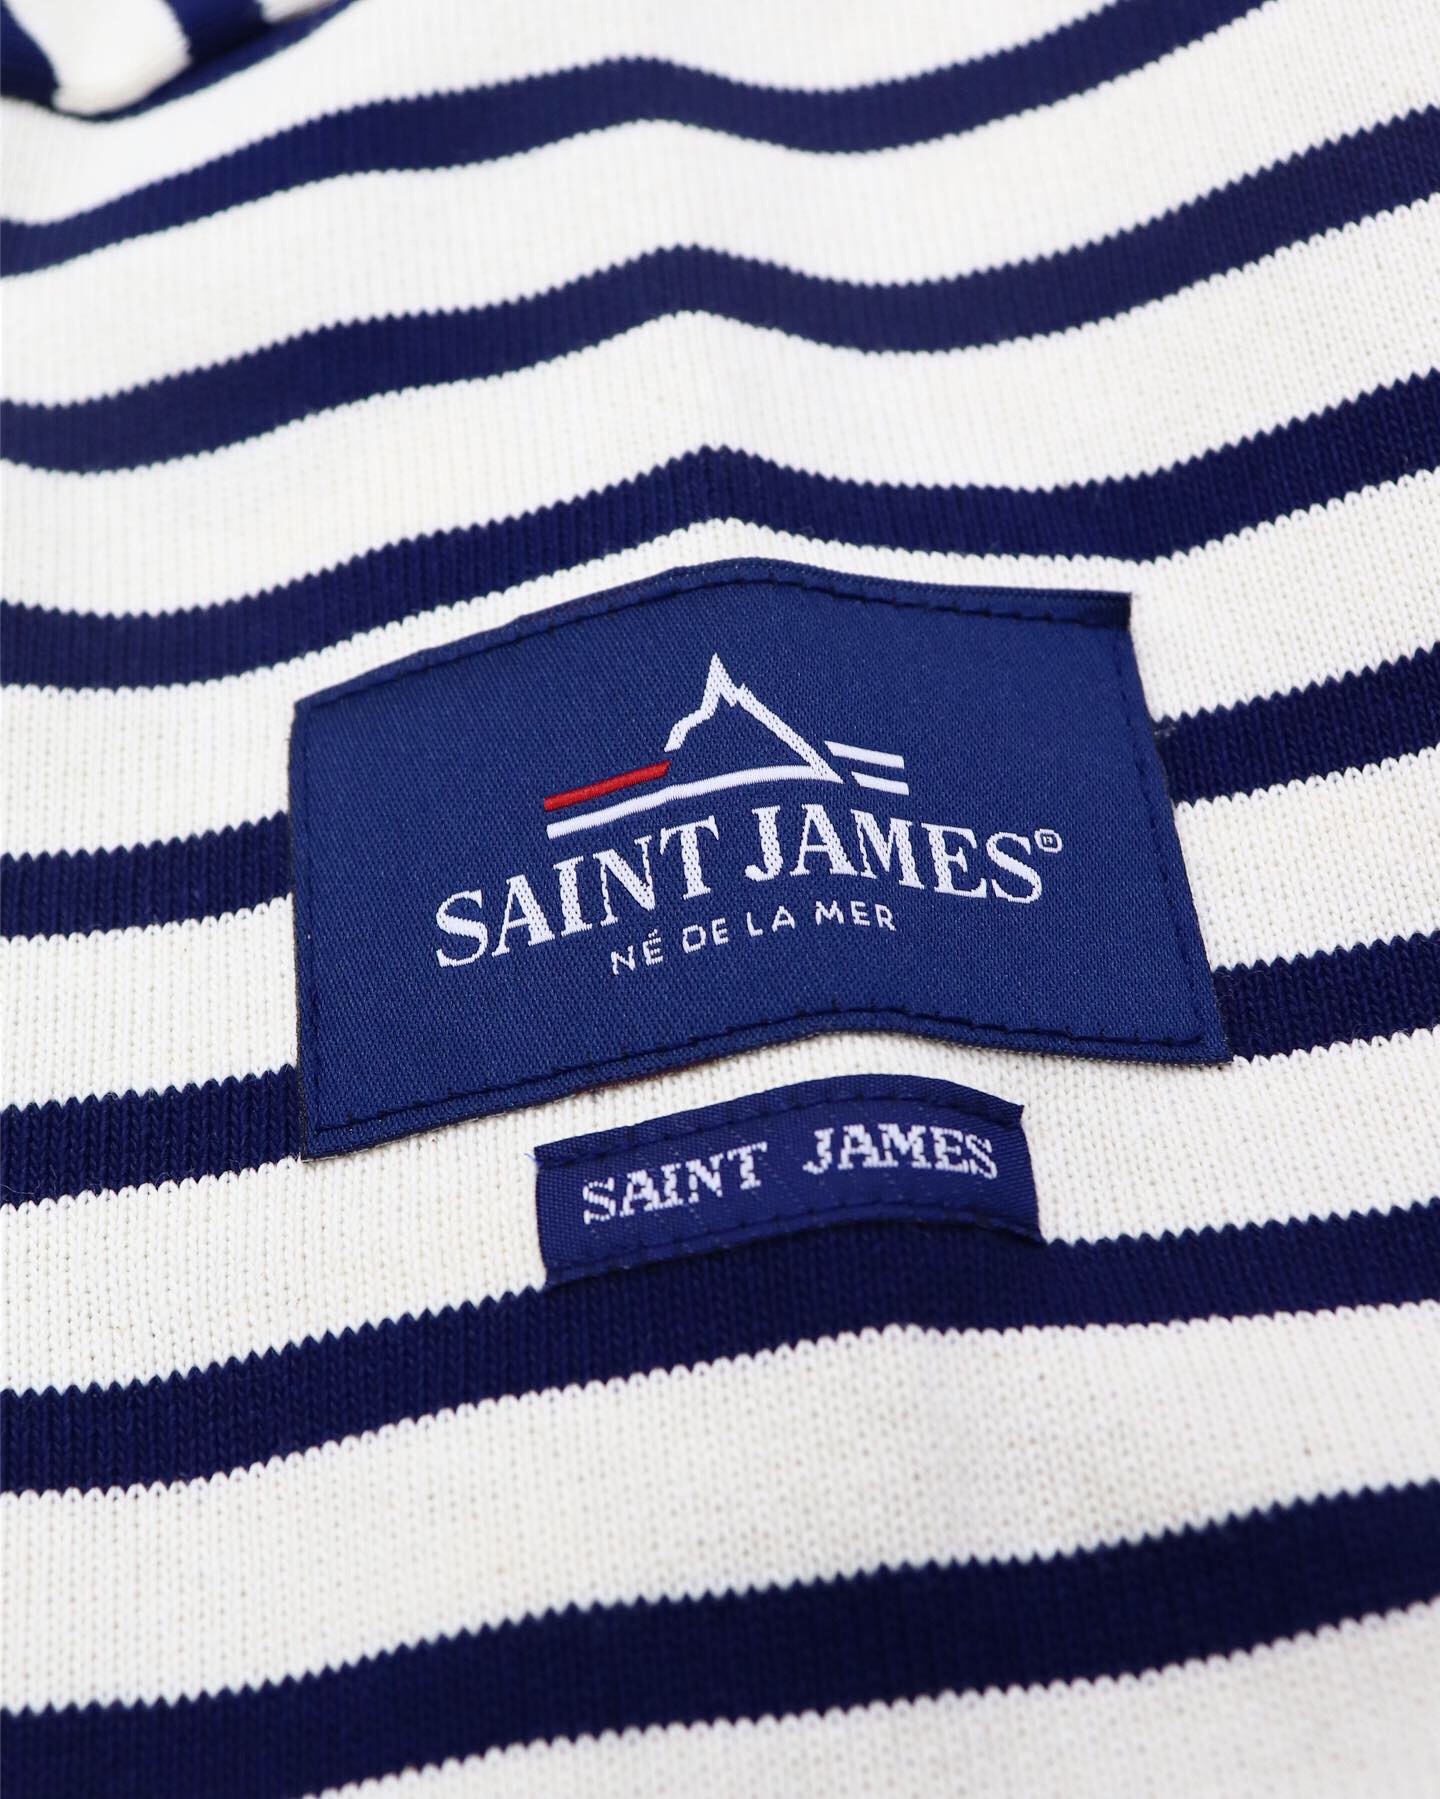 NEW ARRIVAL] SAINT JAMES 130TH ANNIVERSARY MODEL | SELECT STORE SEPTIS